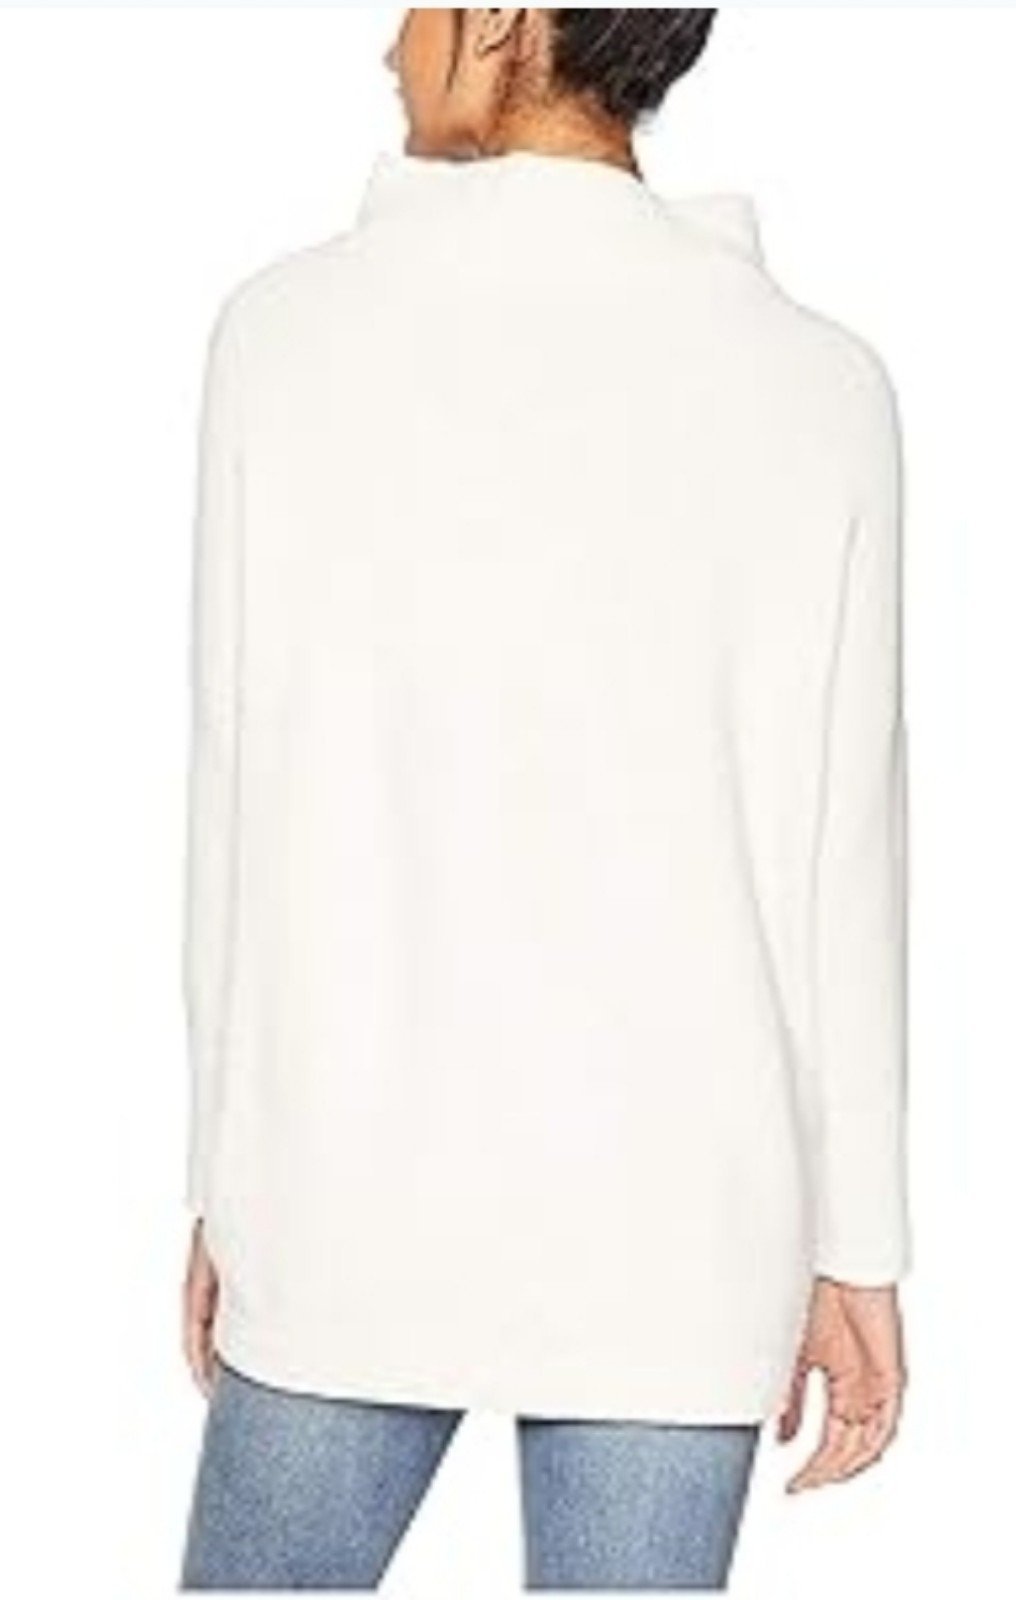 Affordable Free People Women´s Ottoman Slouchy Sweater, Cream, White, XL fqhbSQIuy best sale